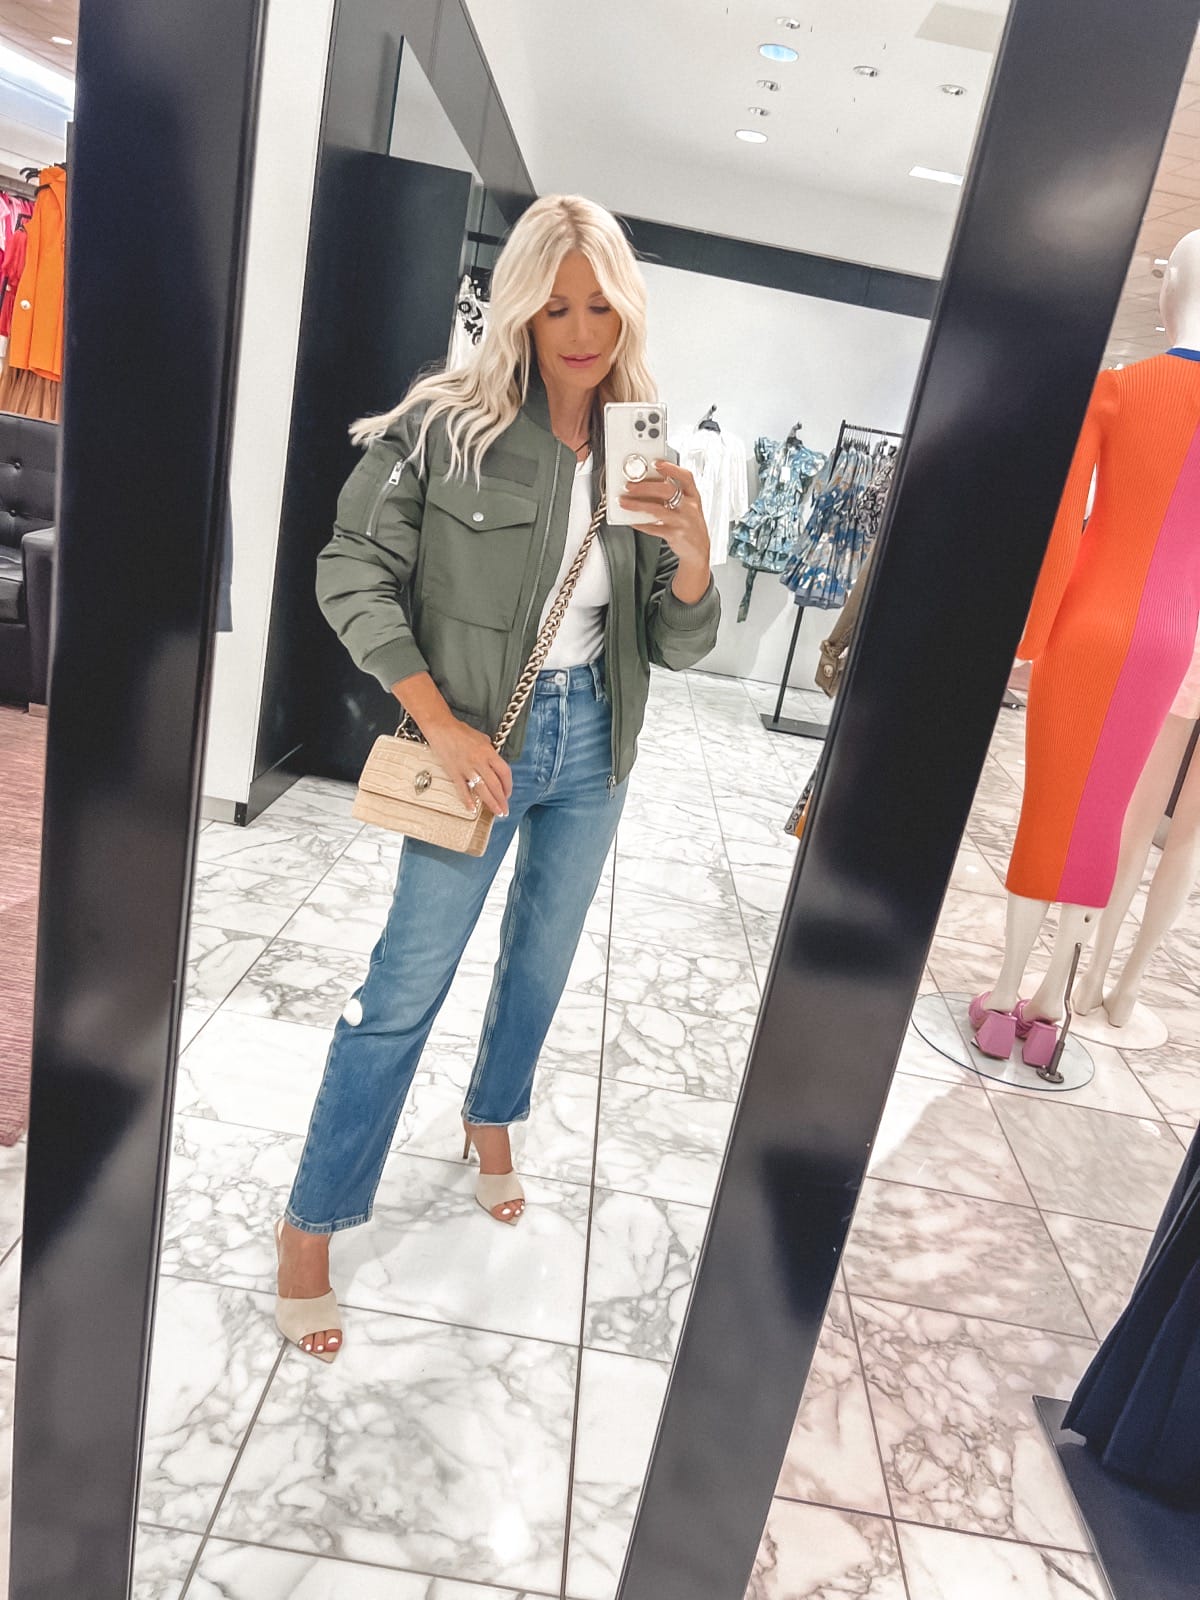 over 40 fashion blogger wearing redone jeans L'agence heels and bomber jacket in one of her Nordstrom Anniversary Outfits 2022